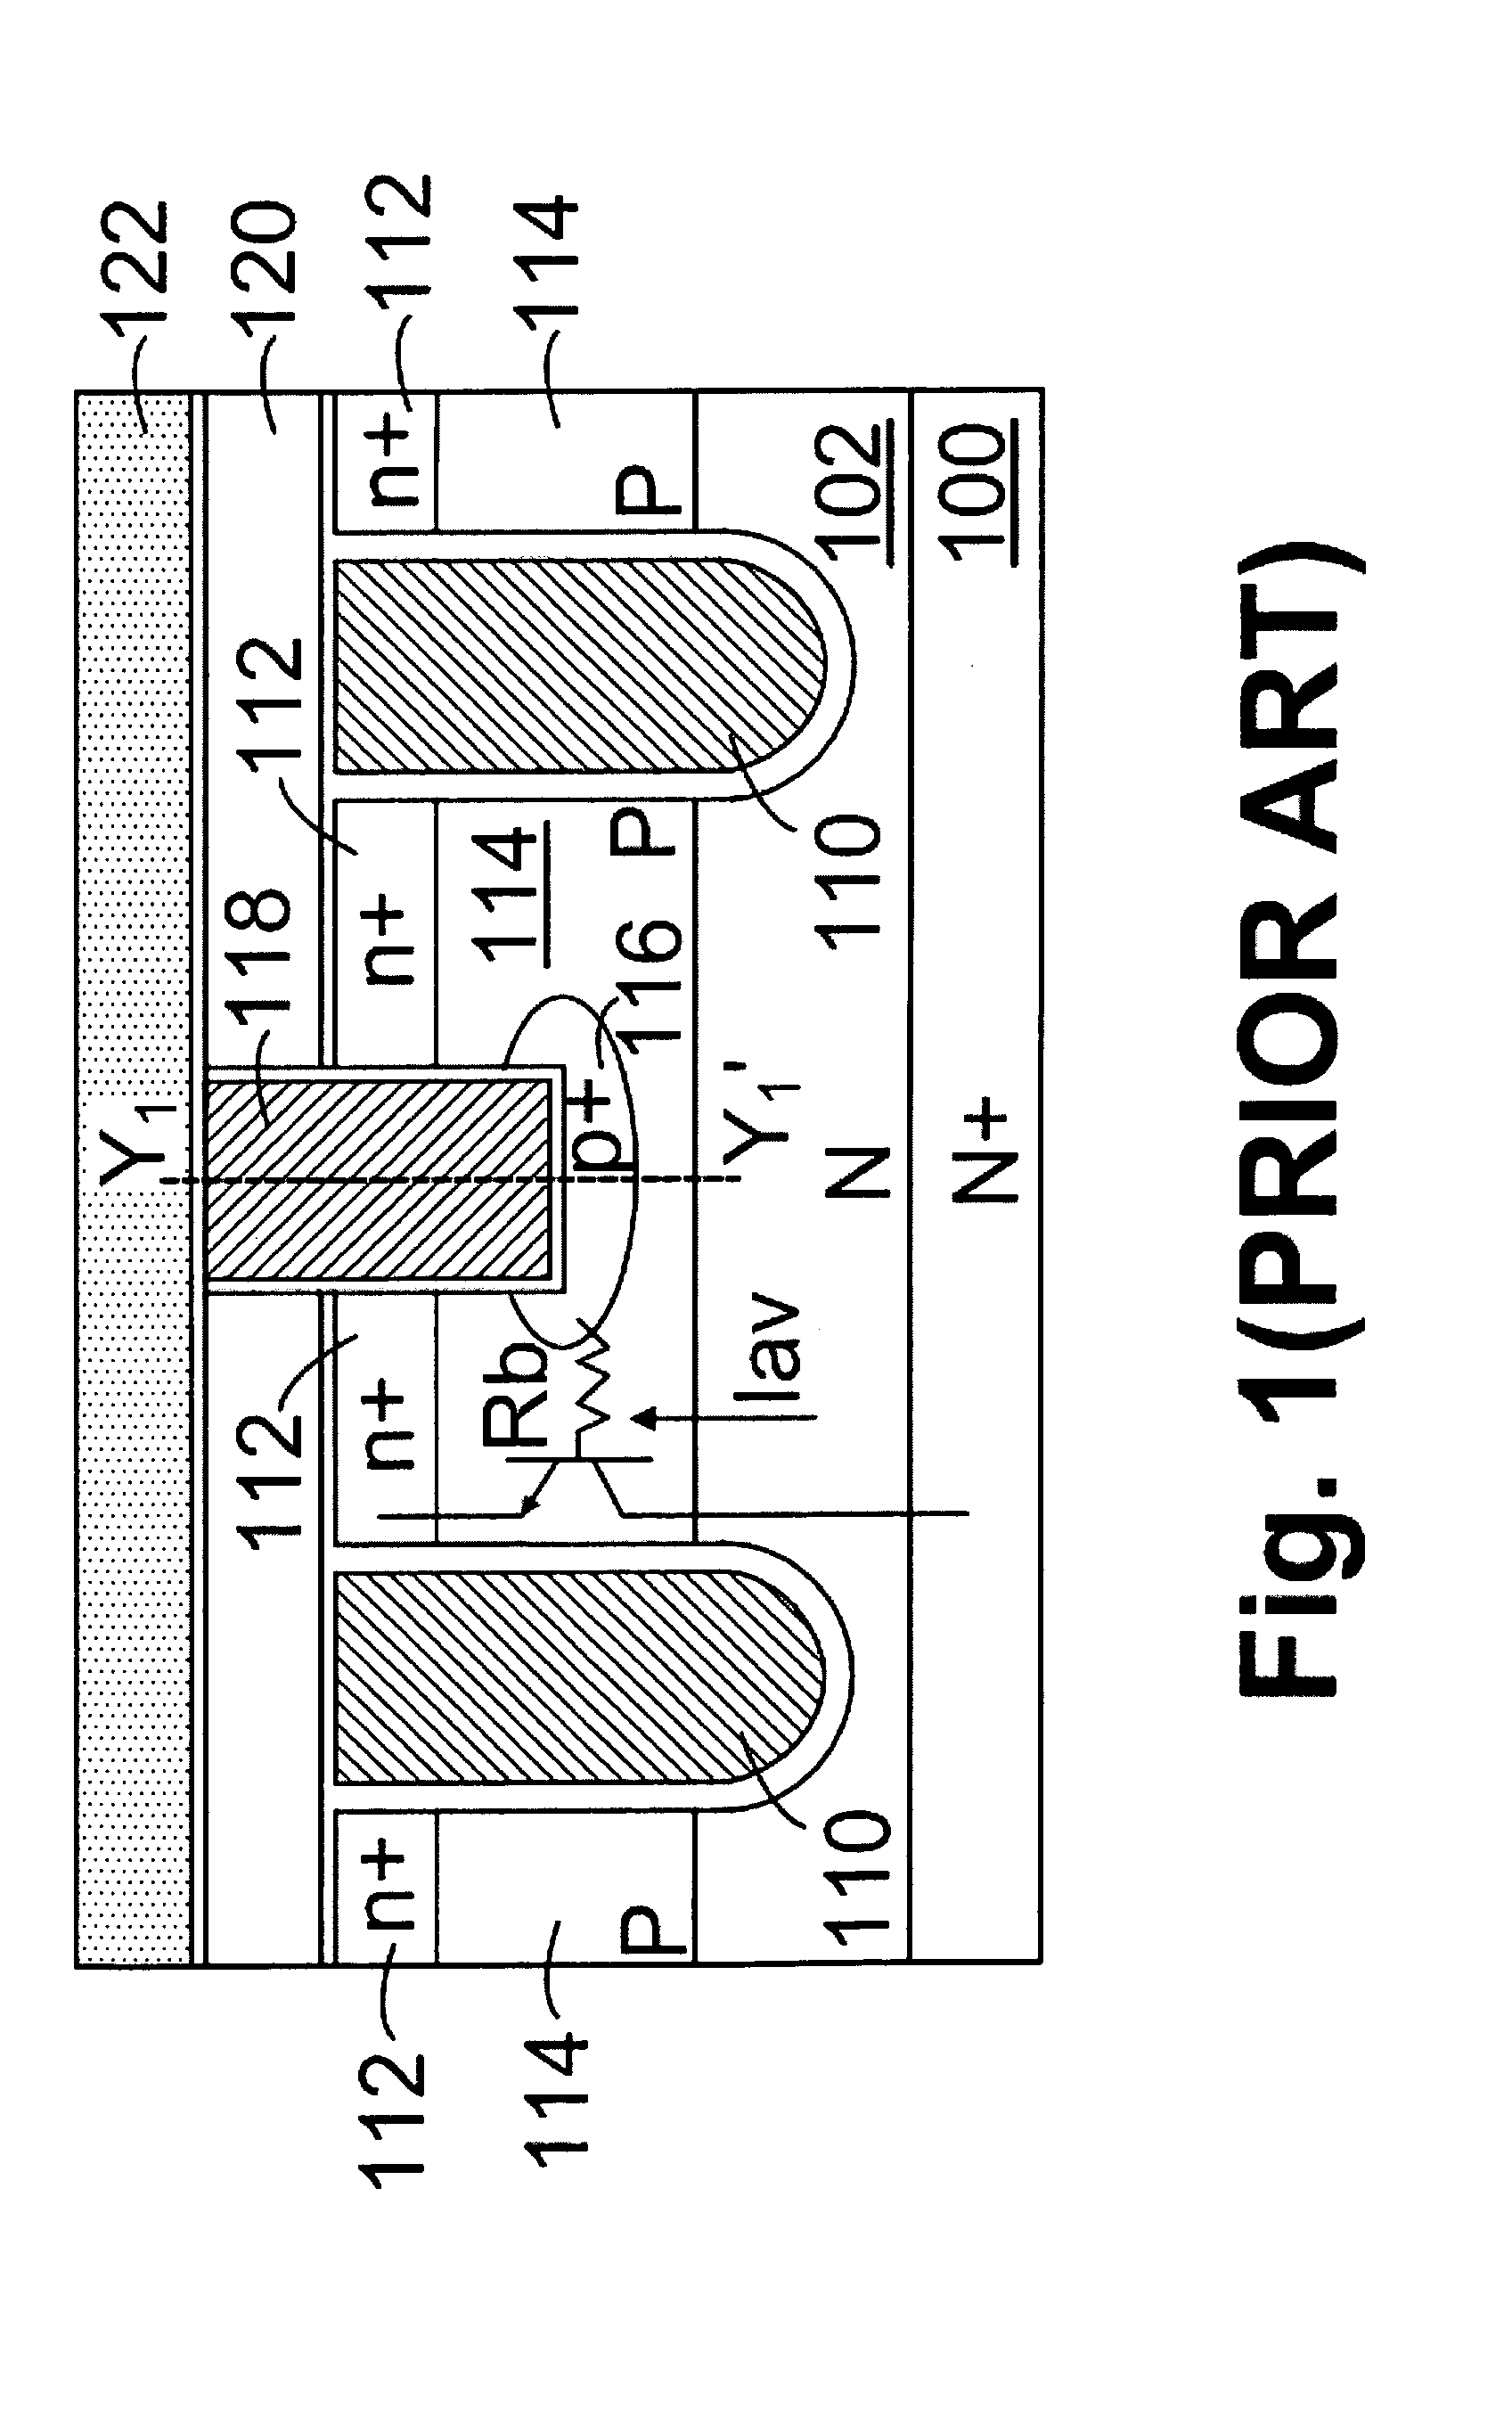 Avalanche capability improvement in power semiconductor devices